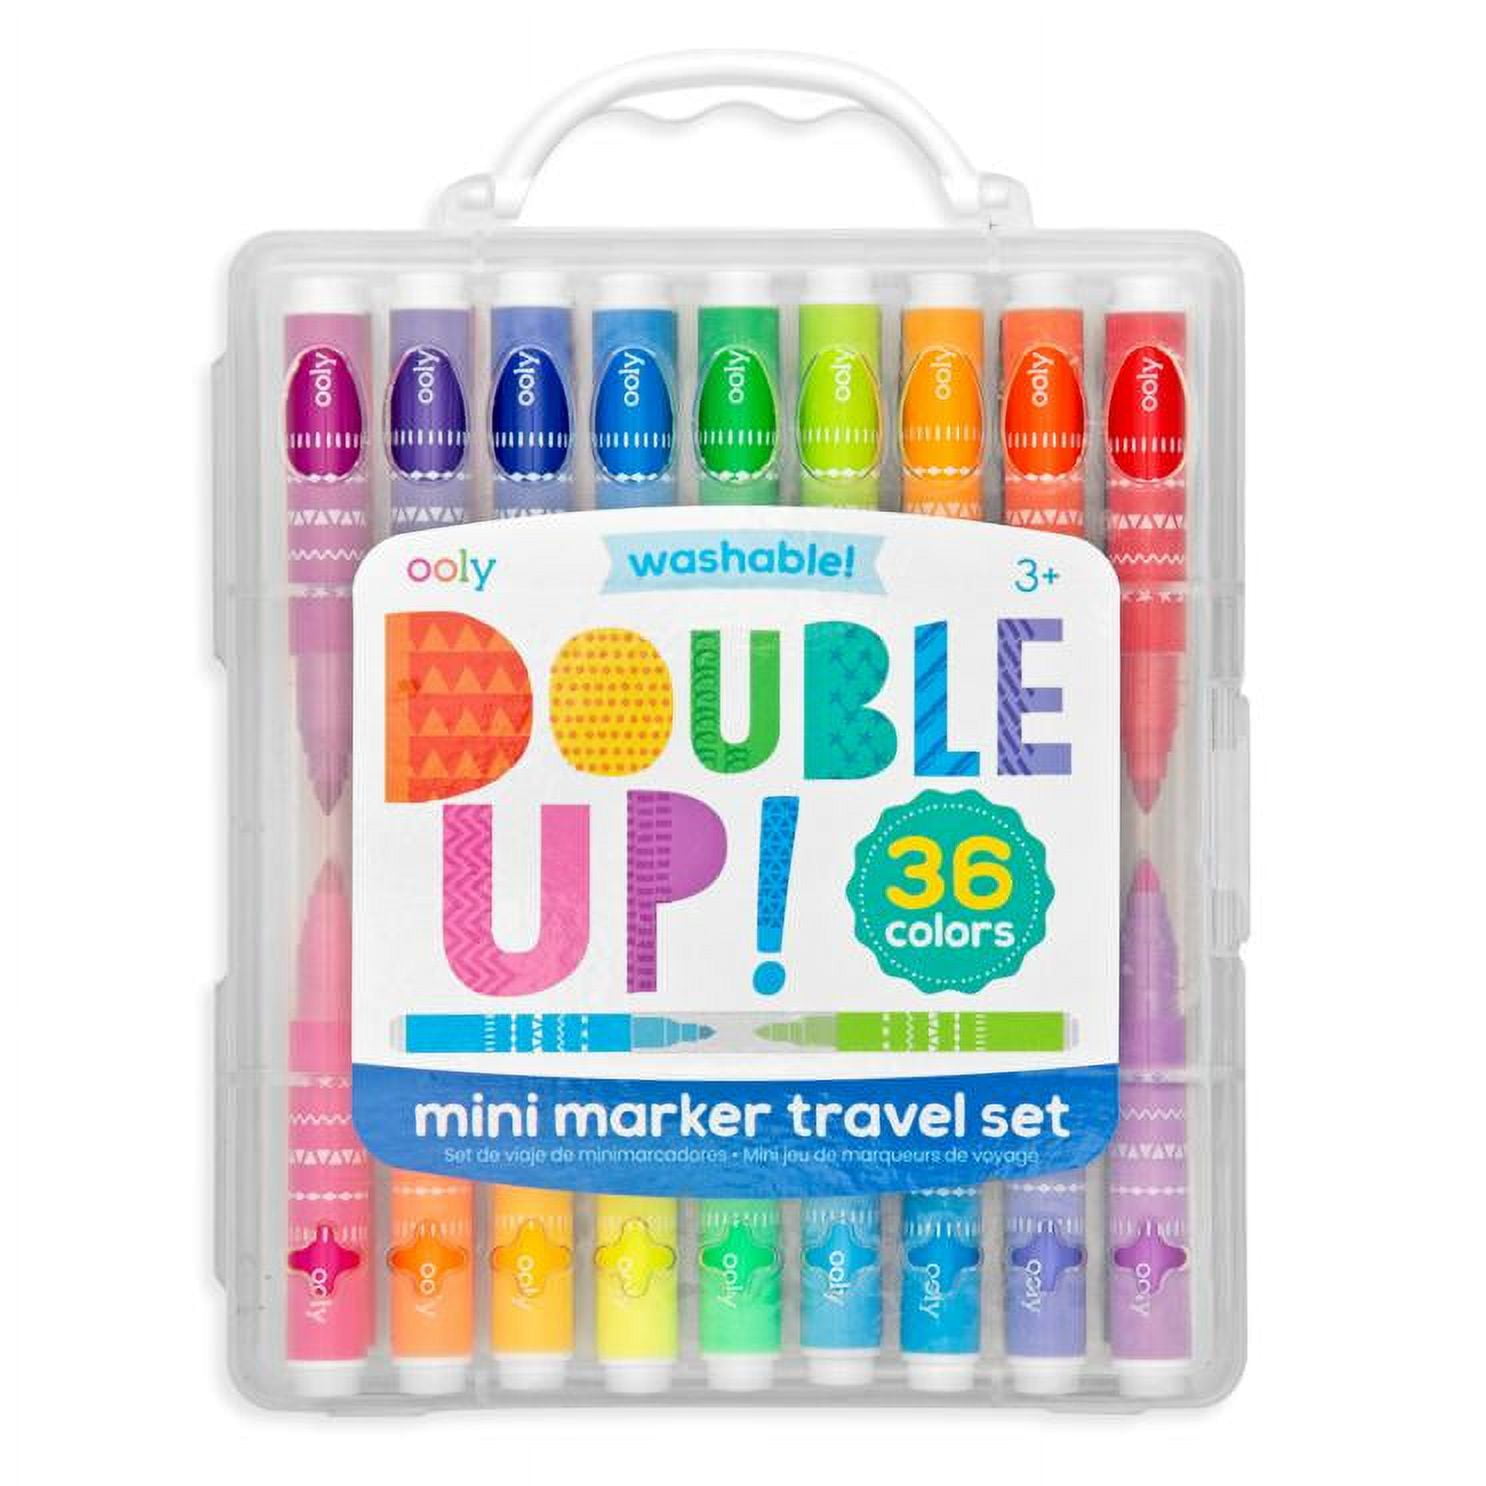 Washable Double Pointed Marker Set 30pc ⋆ Time Machine Hobby